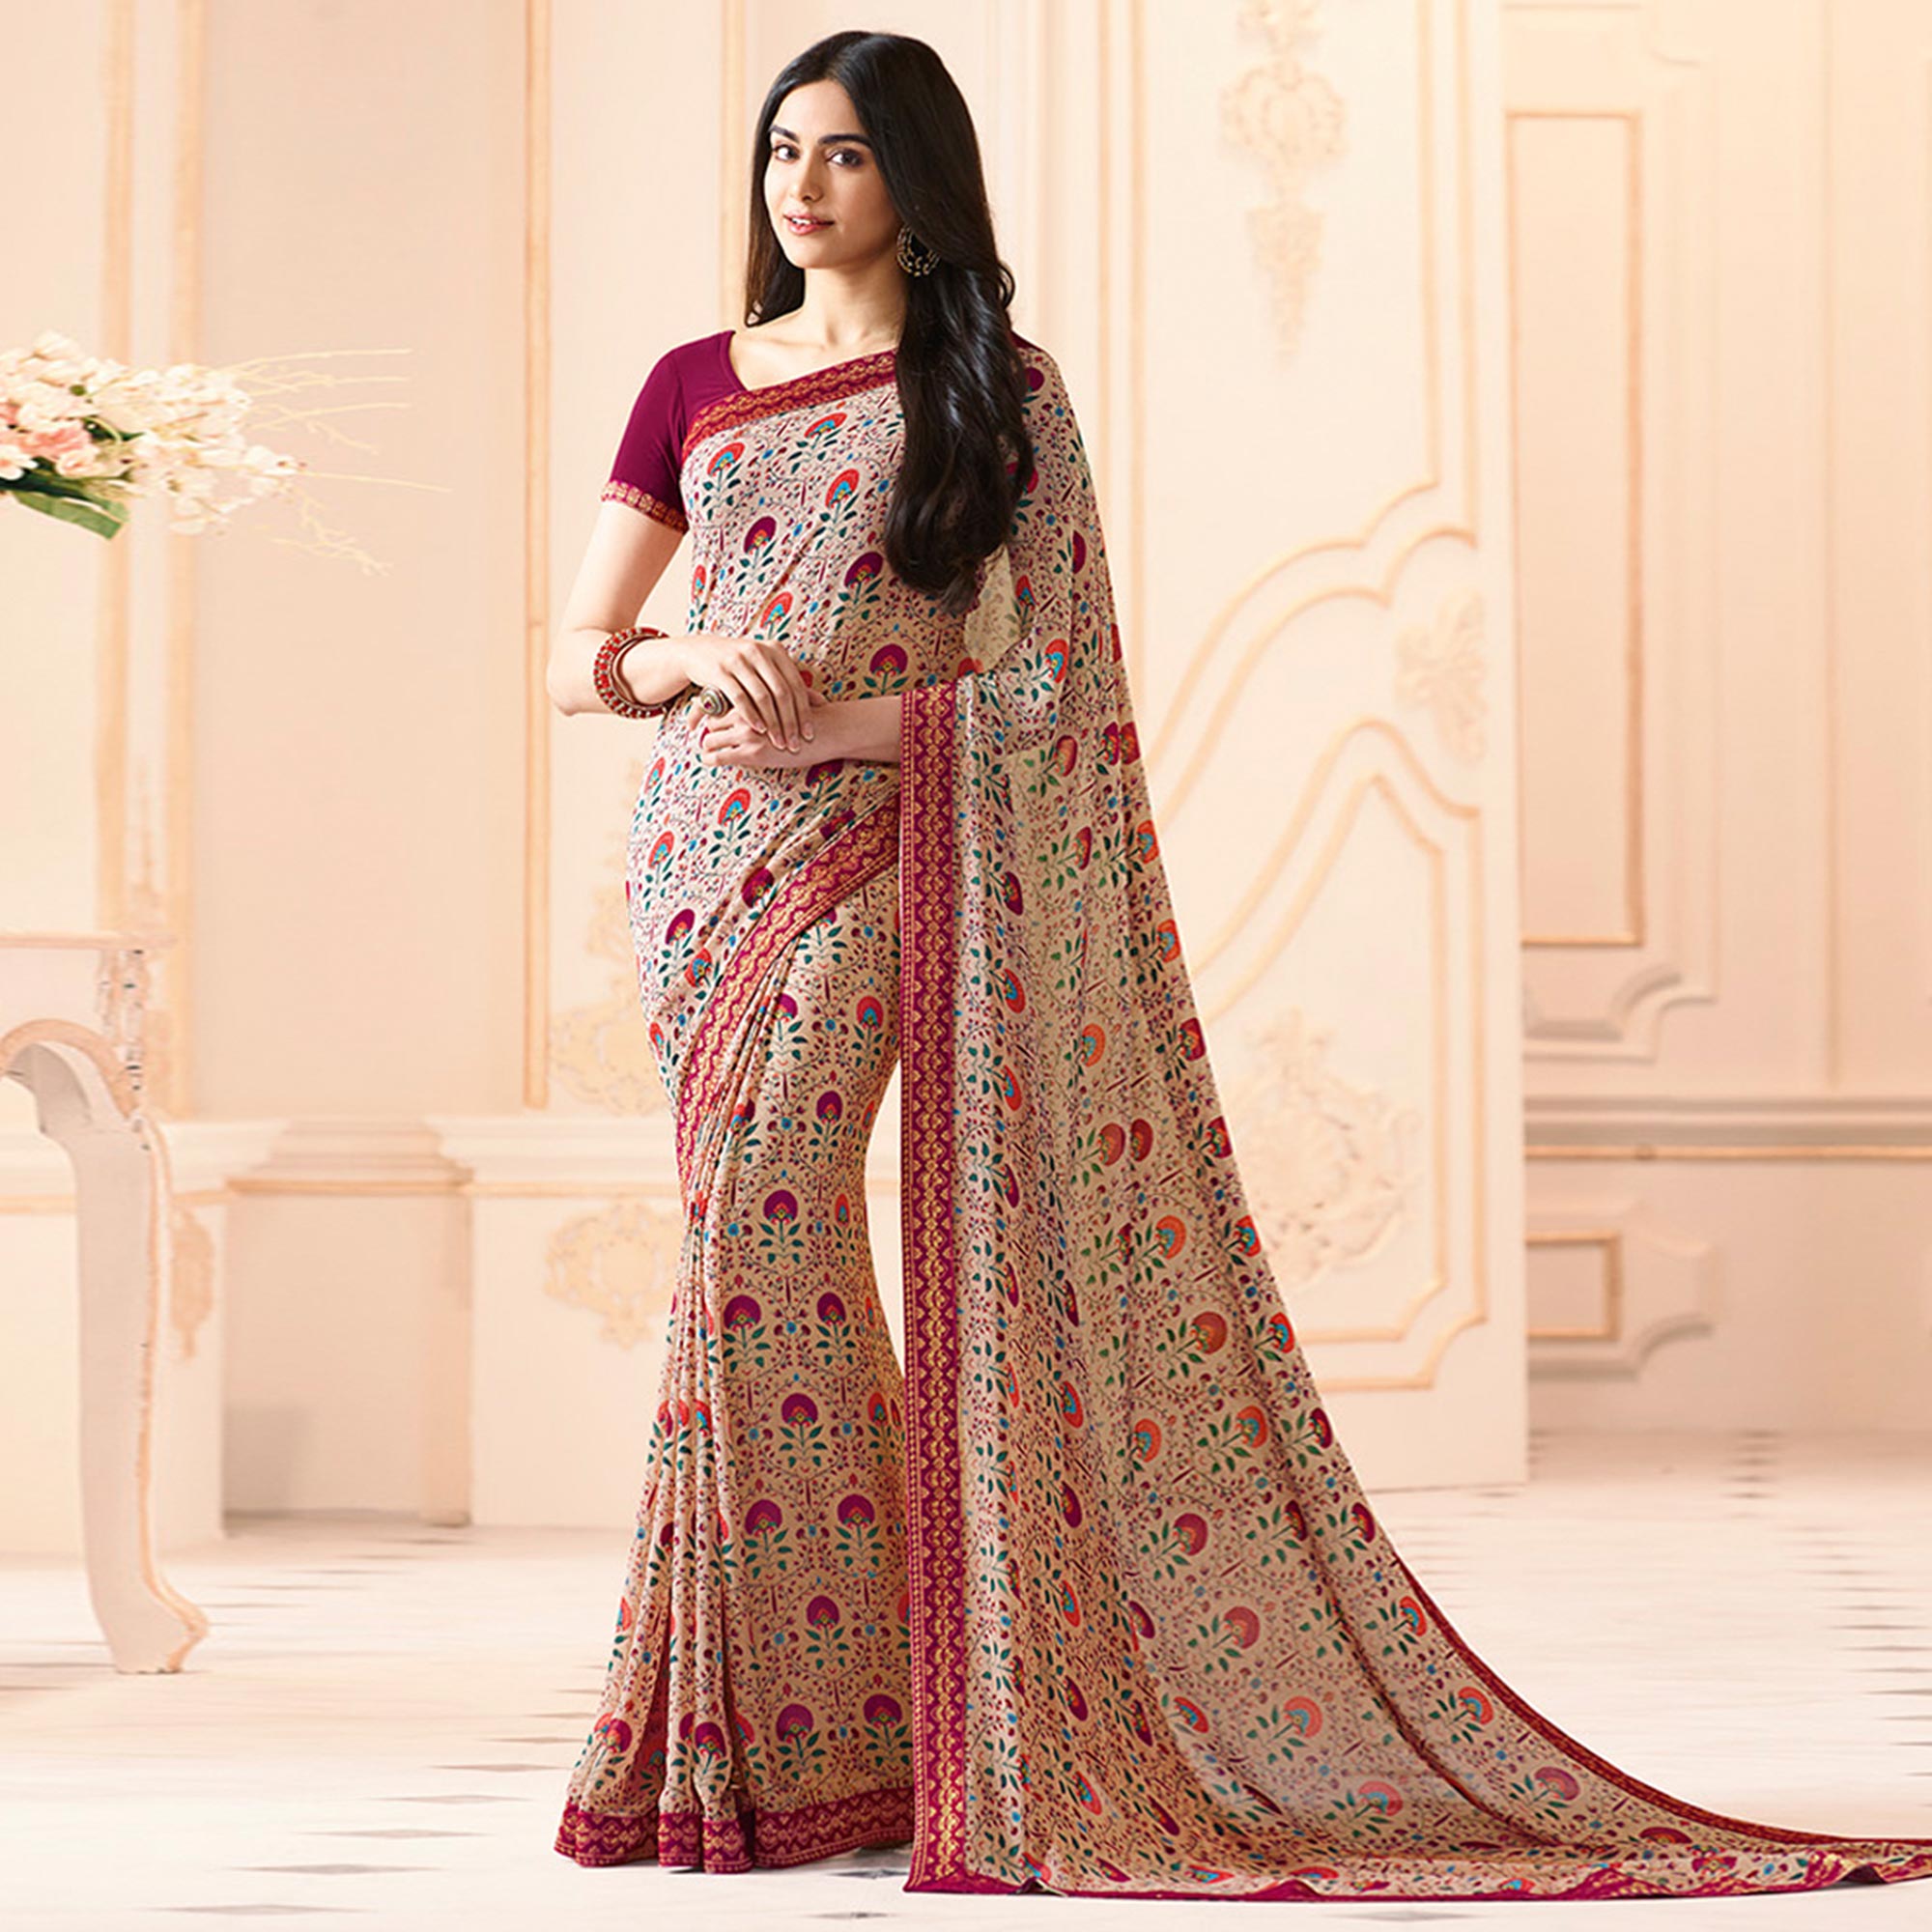 Beige Floral Printed Georgette Saree With Lace Border